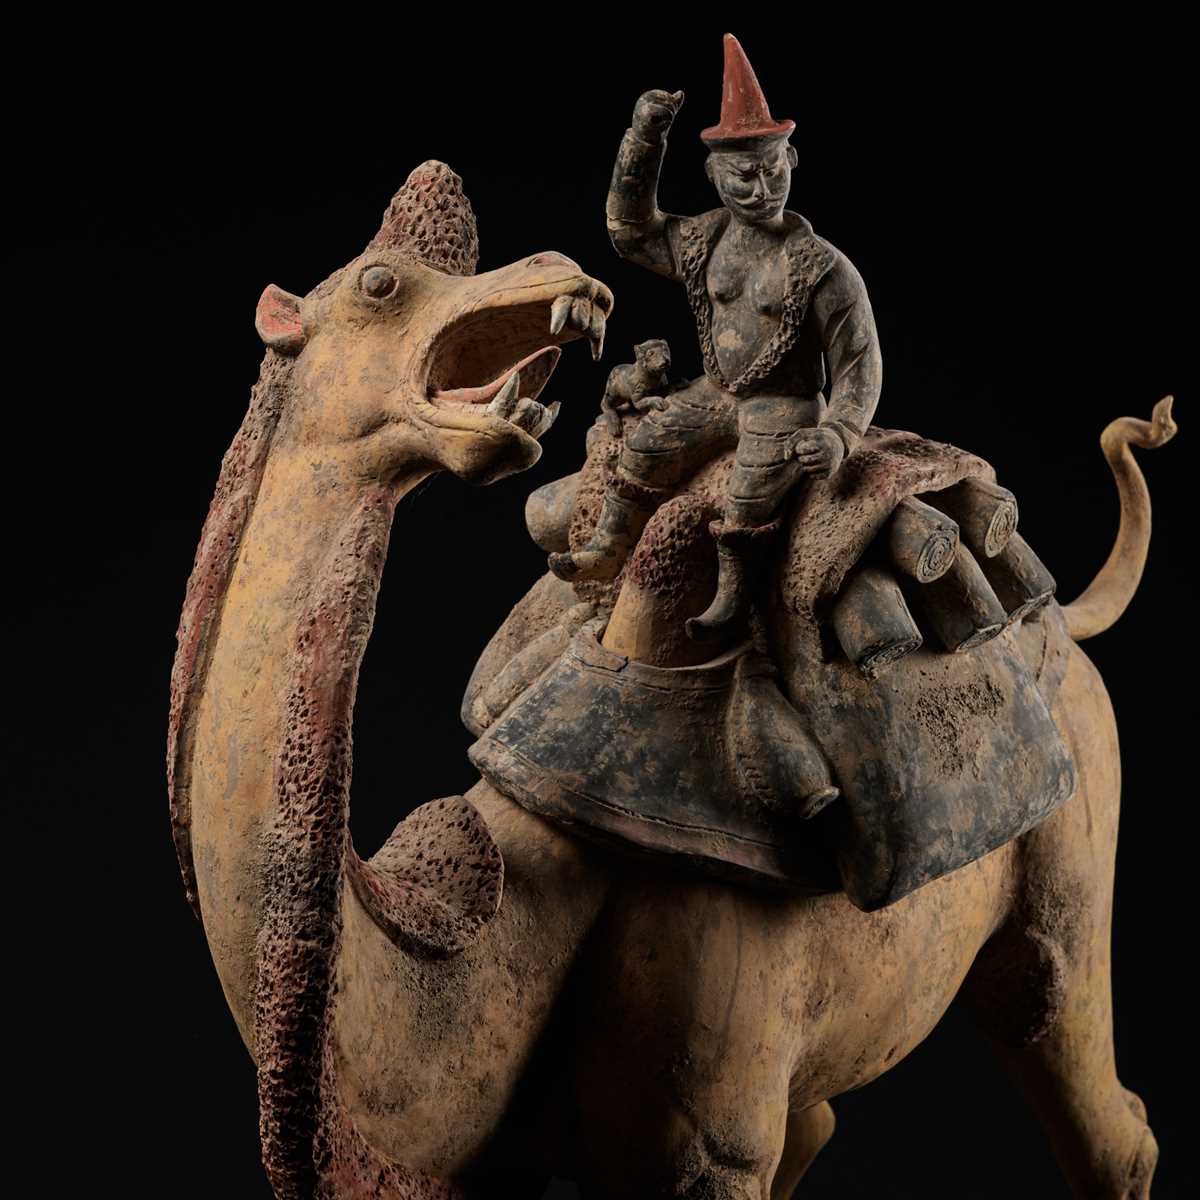 Lot 66 - AN EXCEPTIONALLY LARGE PAINTED POTTERY FIGURE OF A BACTRIAN CAMEL AND A SOGDIAN RIDER, TANG DYNASTY